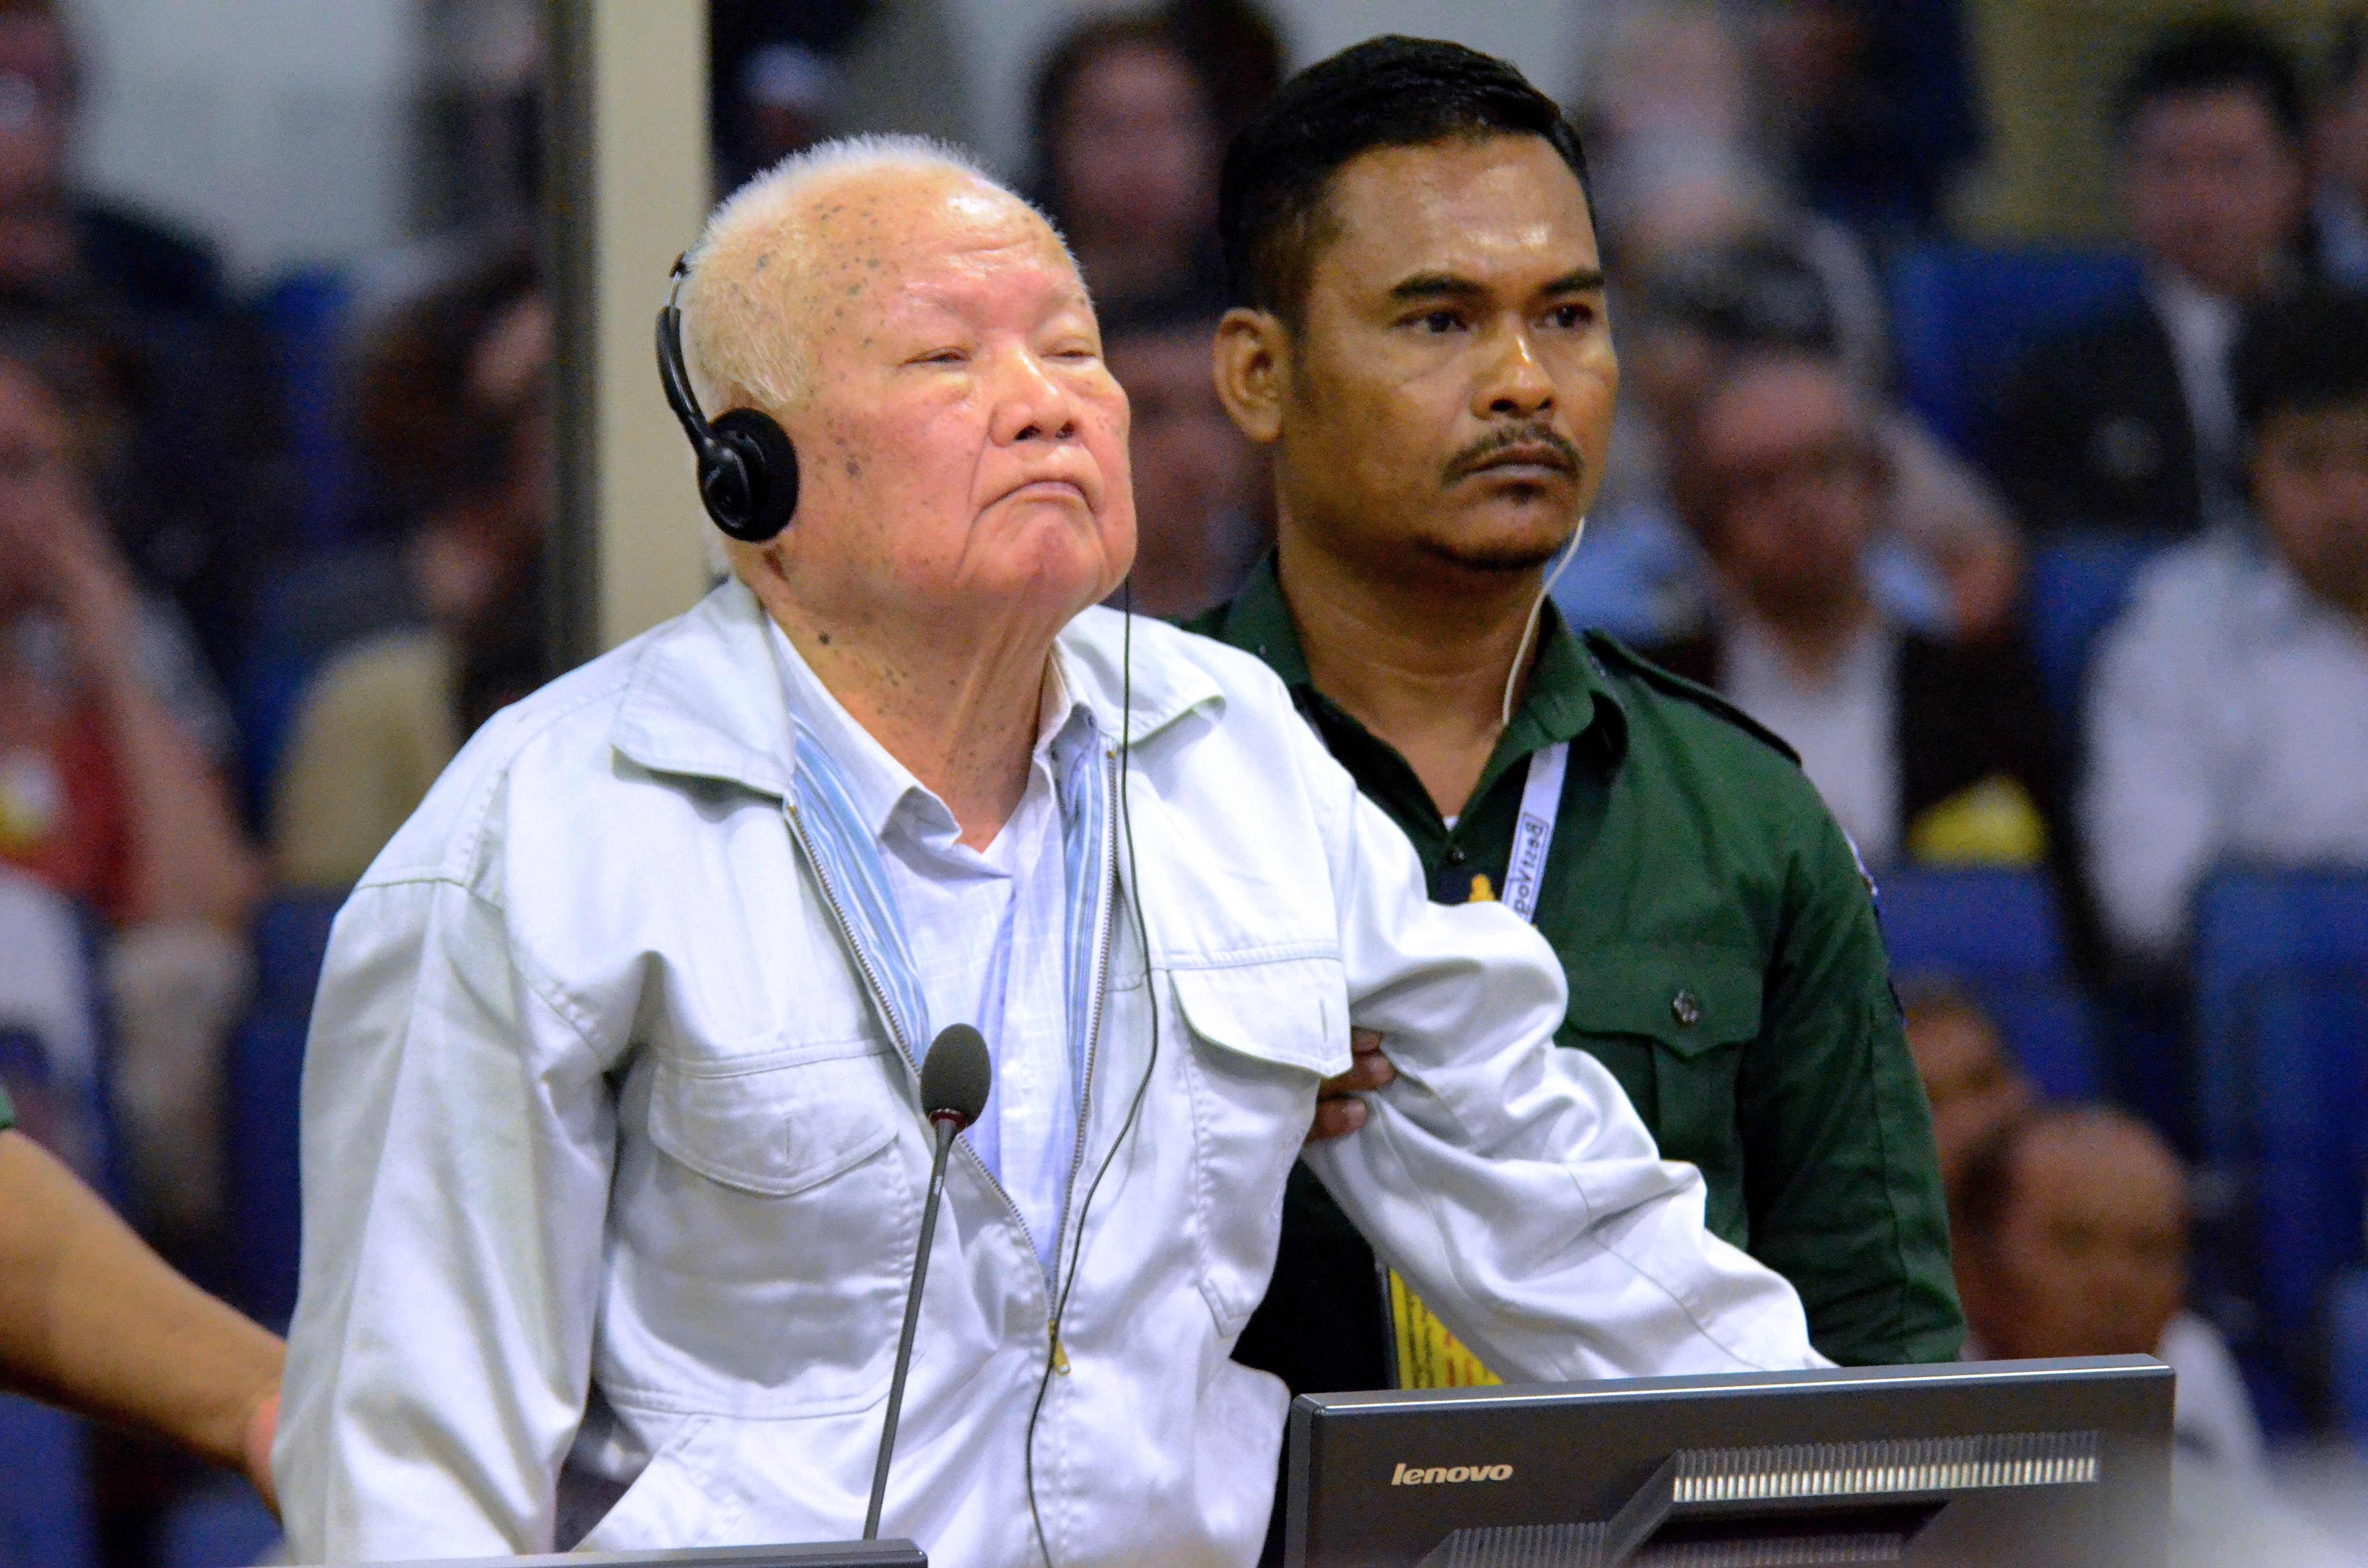 Khmer Rouge leader Khieu Samphan listens to his verdict at the Extraordinary Chambers in the Courts of Cambodia in Phnom Penh on Friday. Photo: AFP